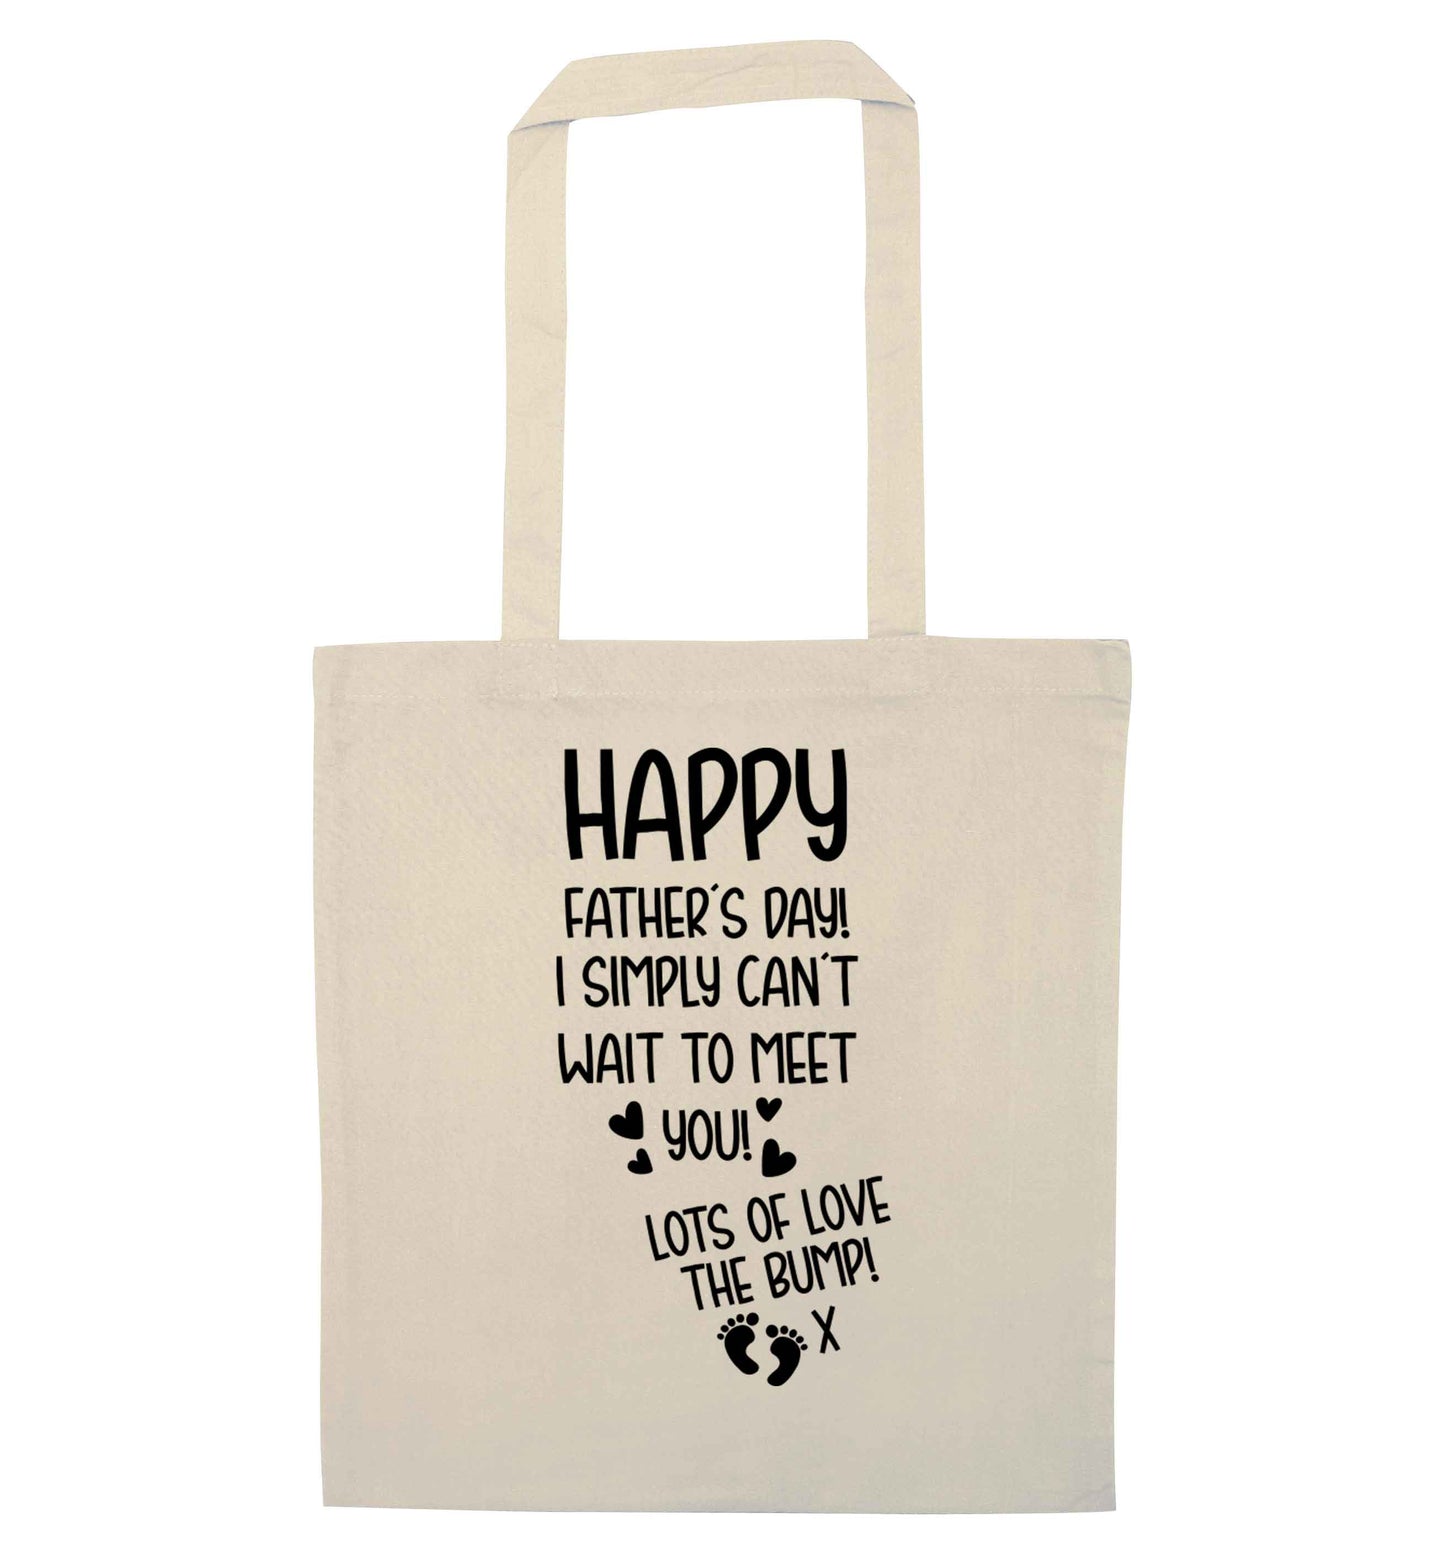 Happy Father's day daddy I can't wait to meet you lot's of love the bump! natural tote bag